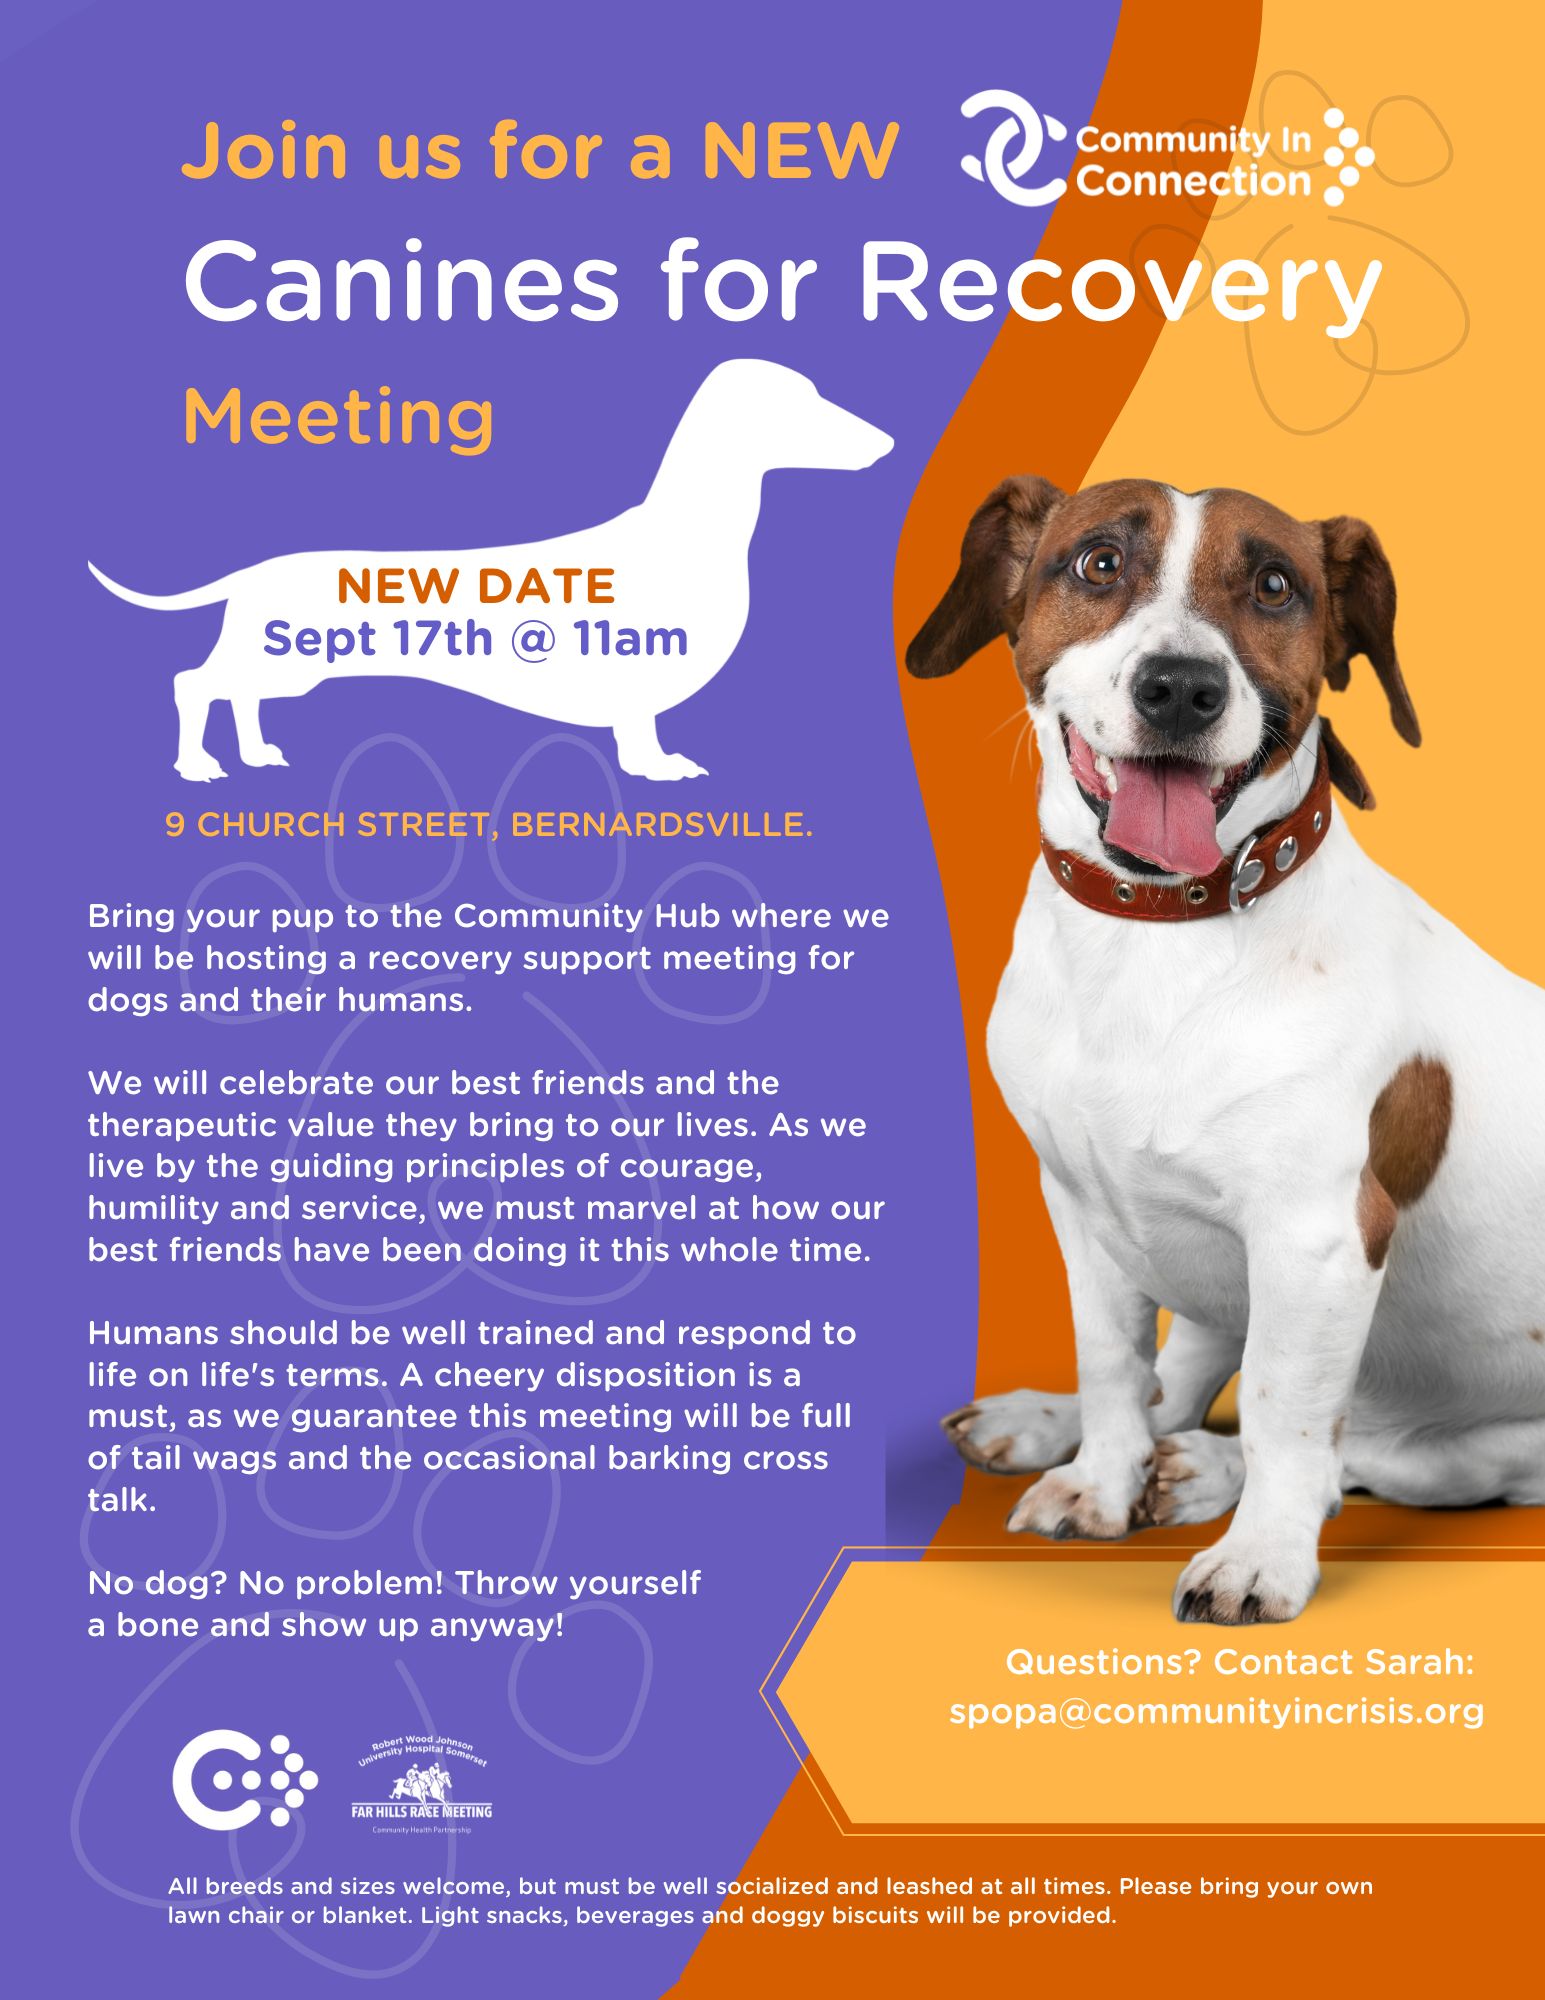 Canines for Recovery | Community in Crisis